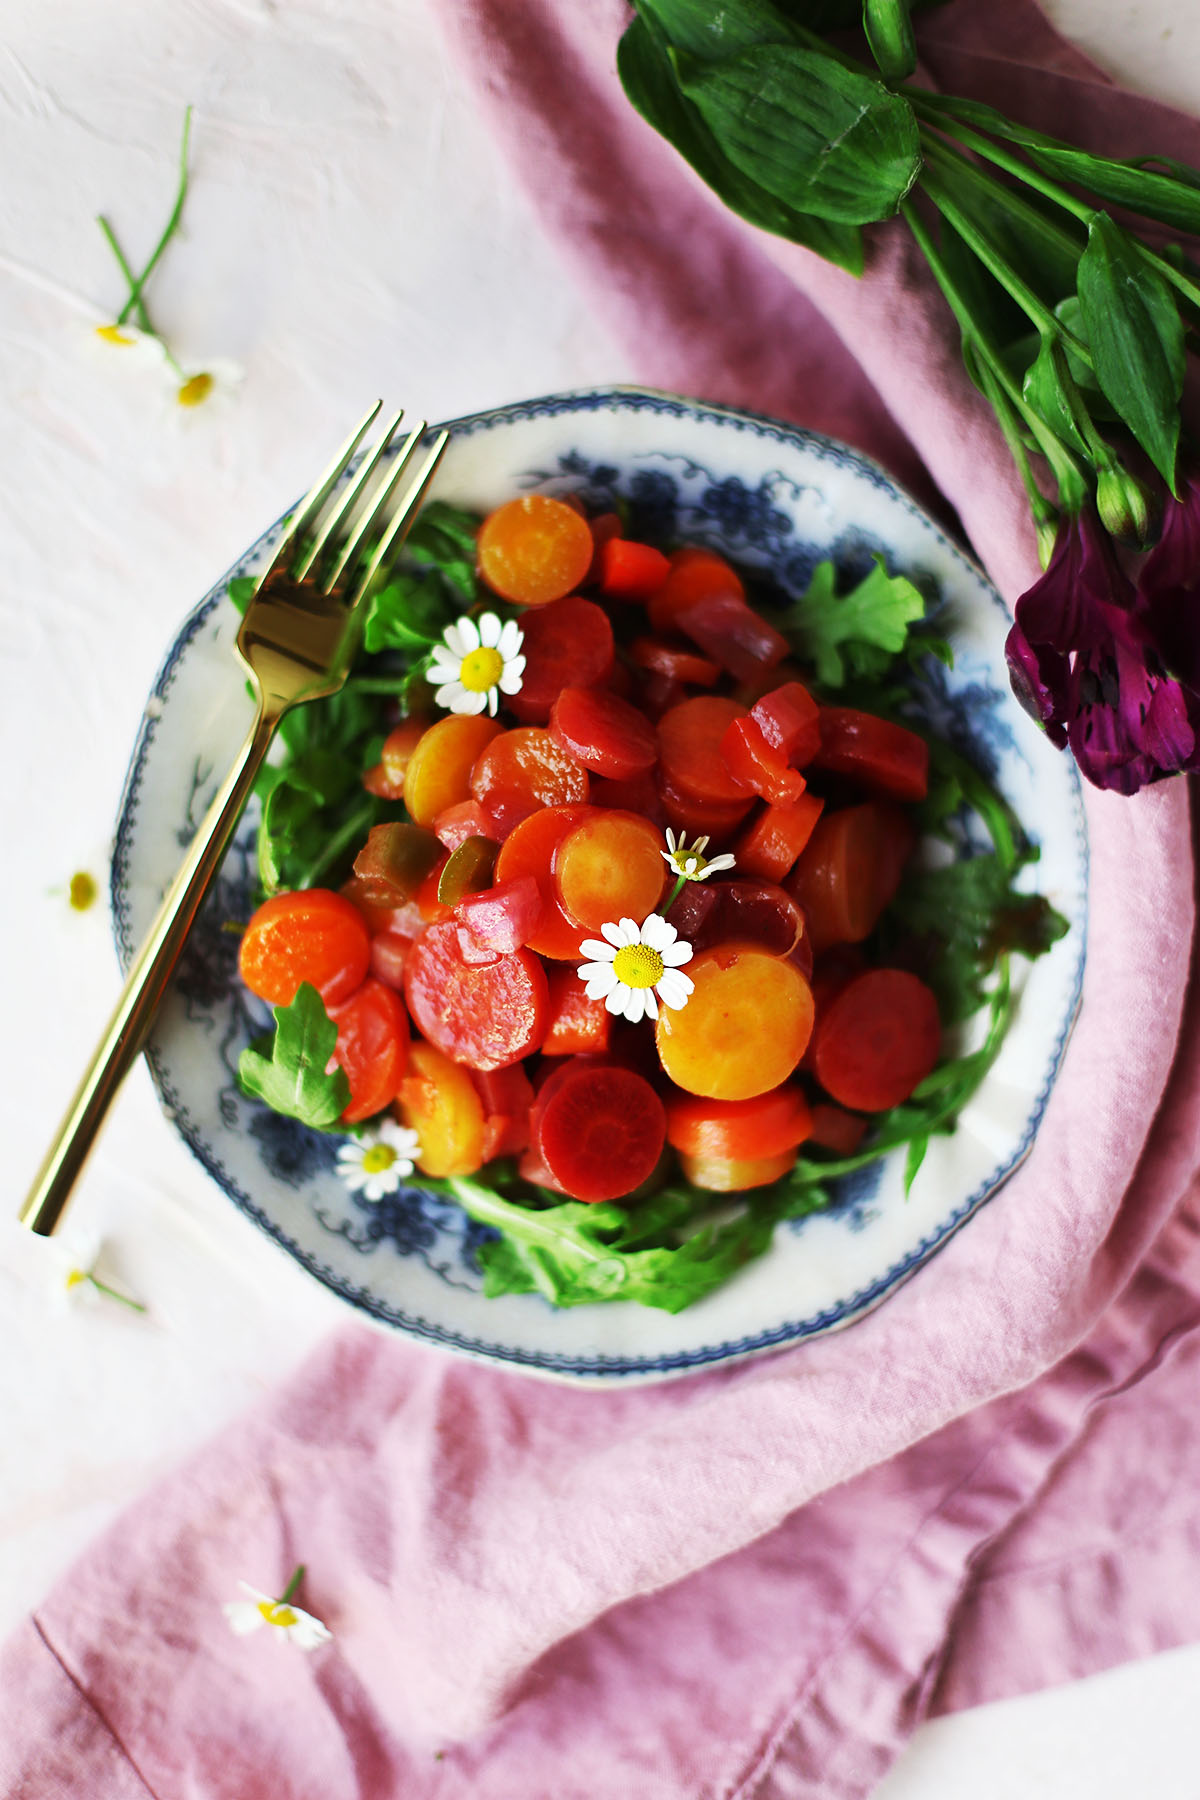 Old Fashioned Rainbow Copper Penny Salad